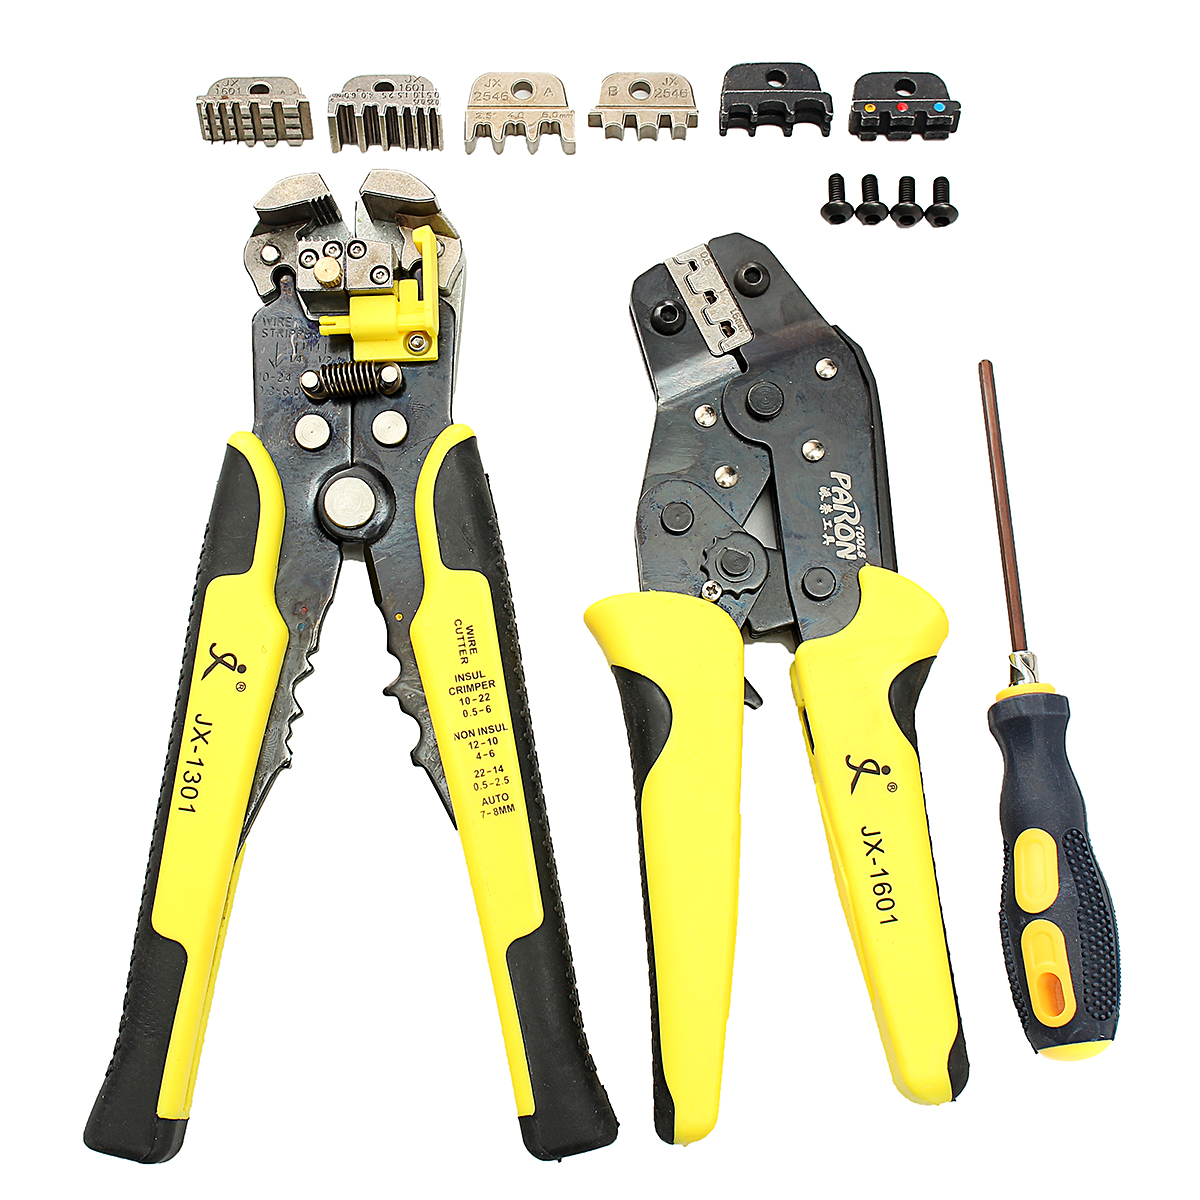 JX-D4301-Wire-Crimpers-Engineering-Ratcheting-Terminal-Crimping-Pliers-Tool-Set-1193651-1